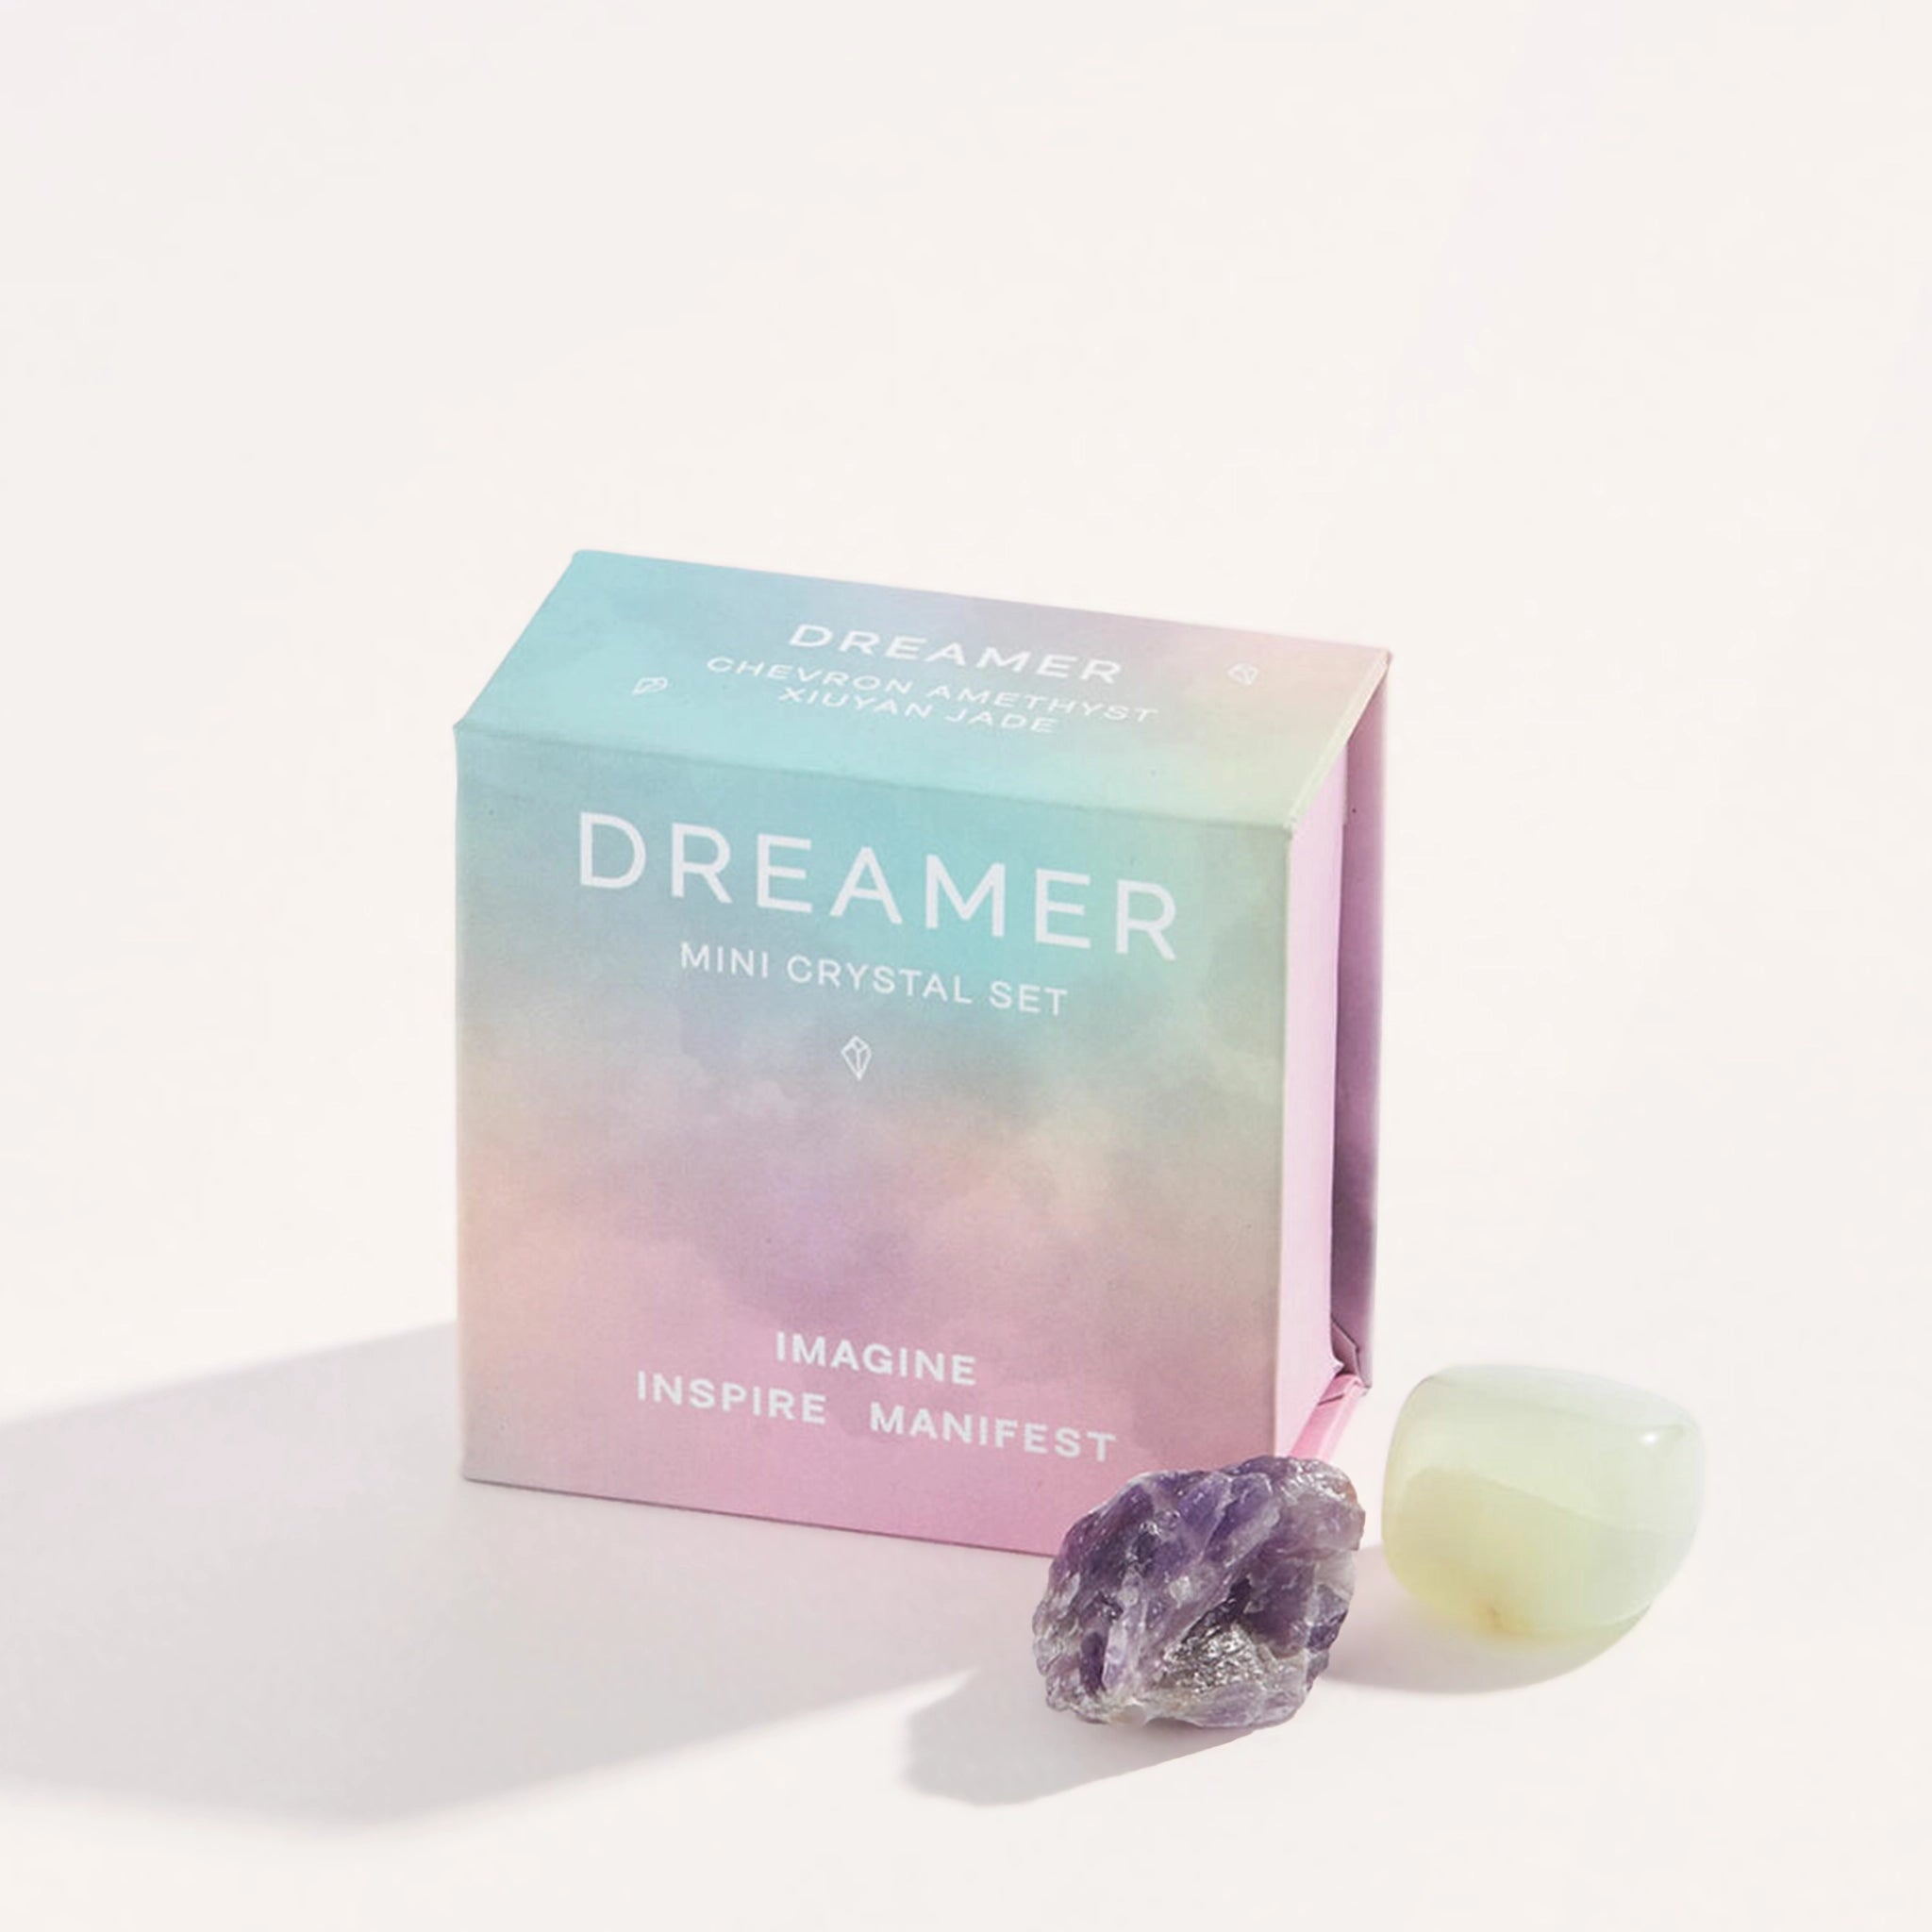 A light blue, and purple small box with a mini crystal set inside of it along with white text on the front that reads, "Dreamer Mini Crystal Set. Imagine, Inspire, Manifest".